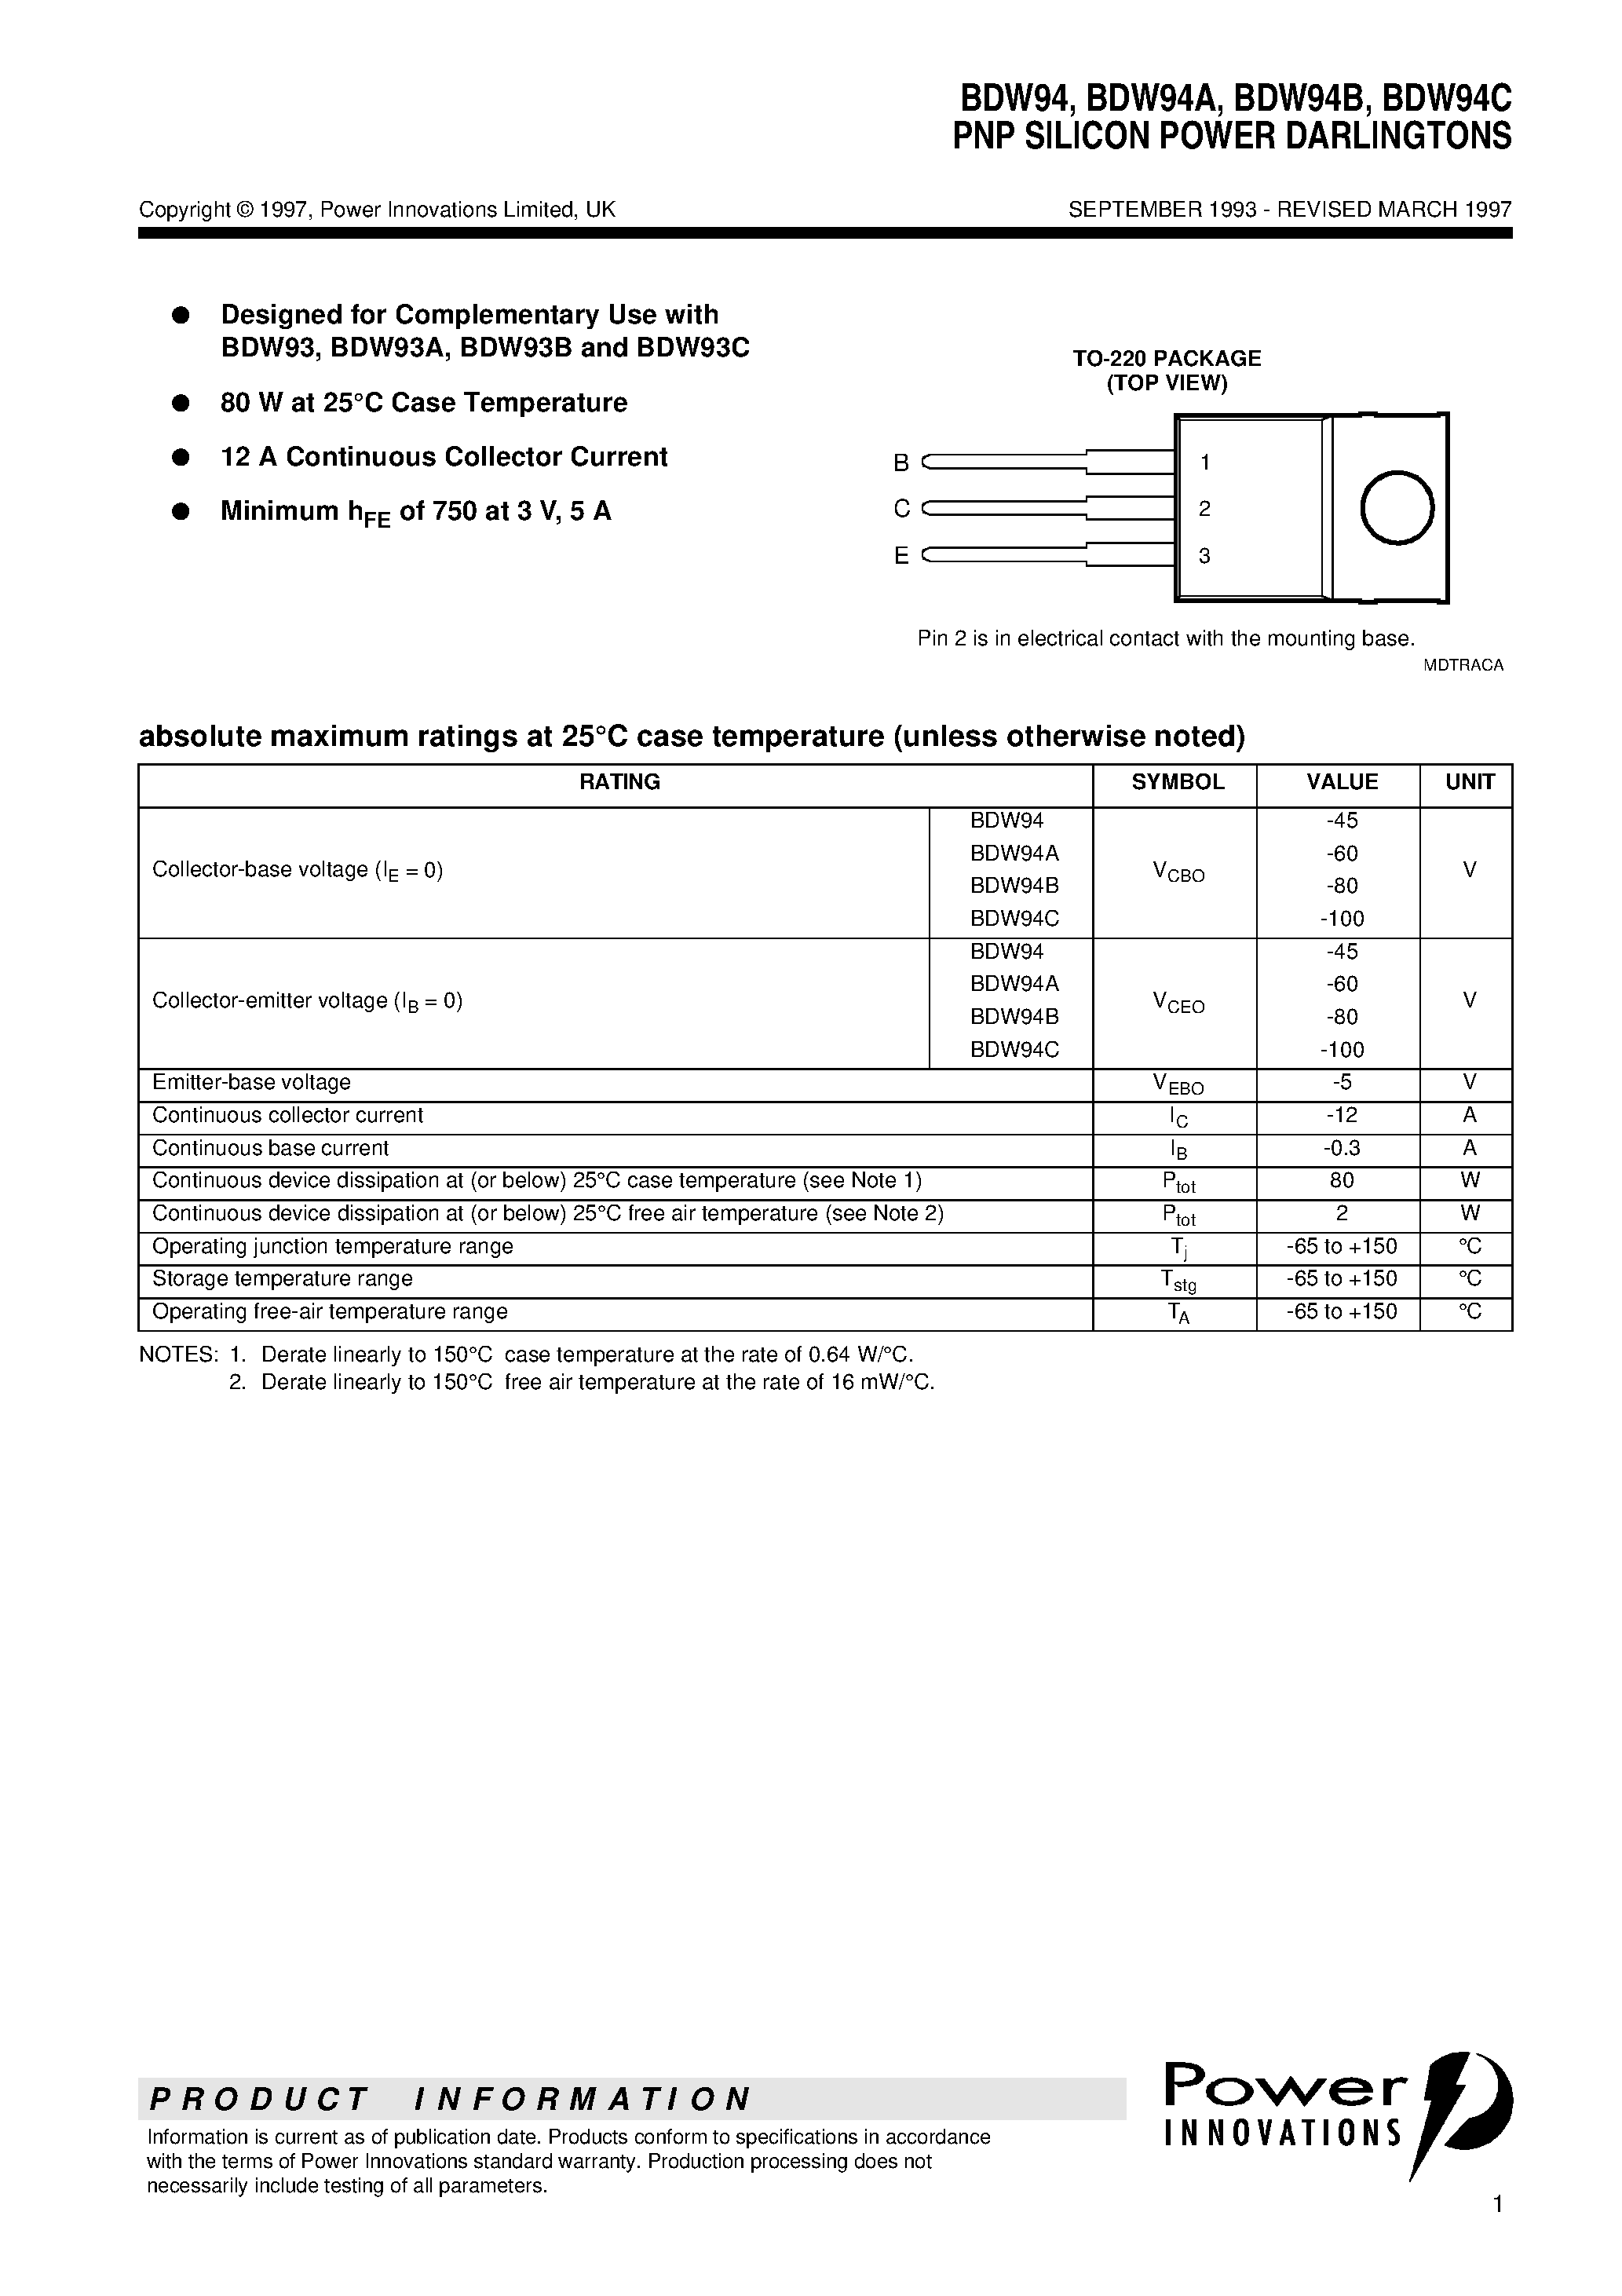 Datasheet BDW94A - PNP SILICON POWER DARLINGTONS page 1